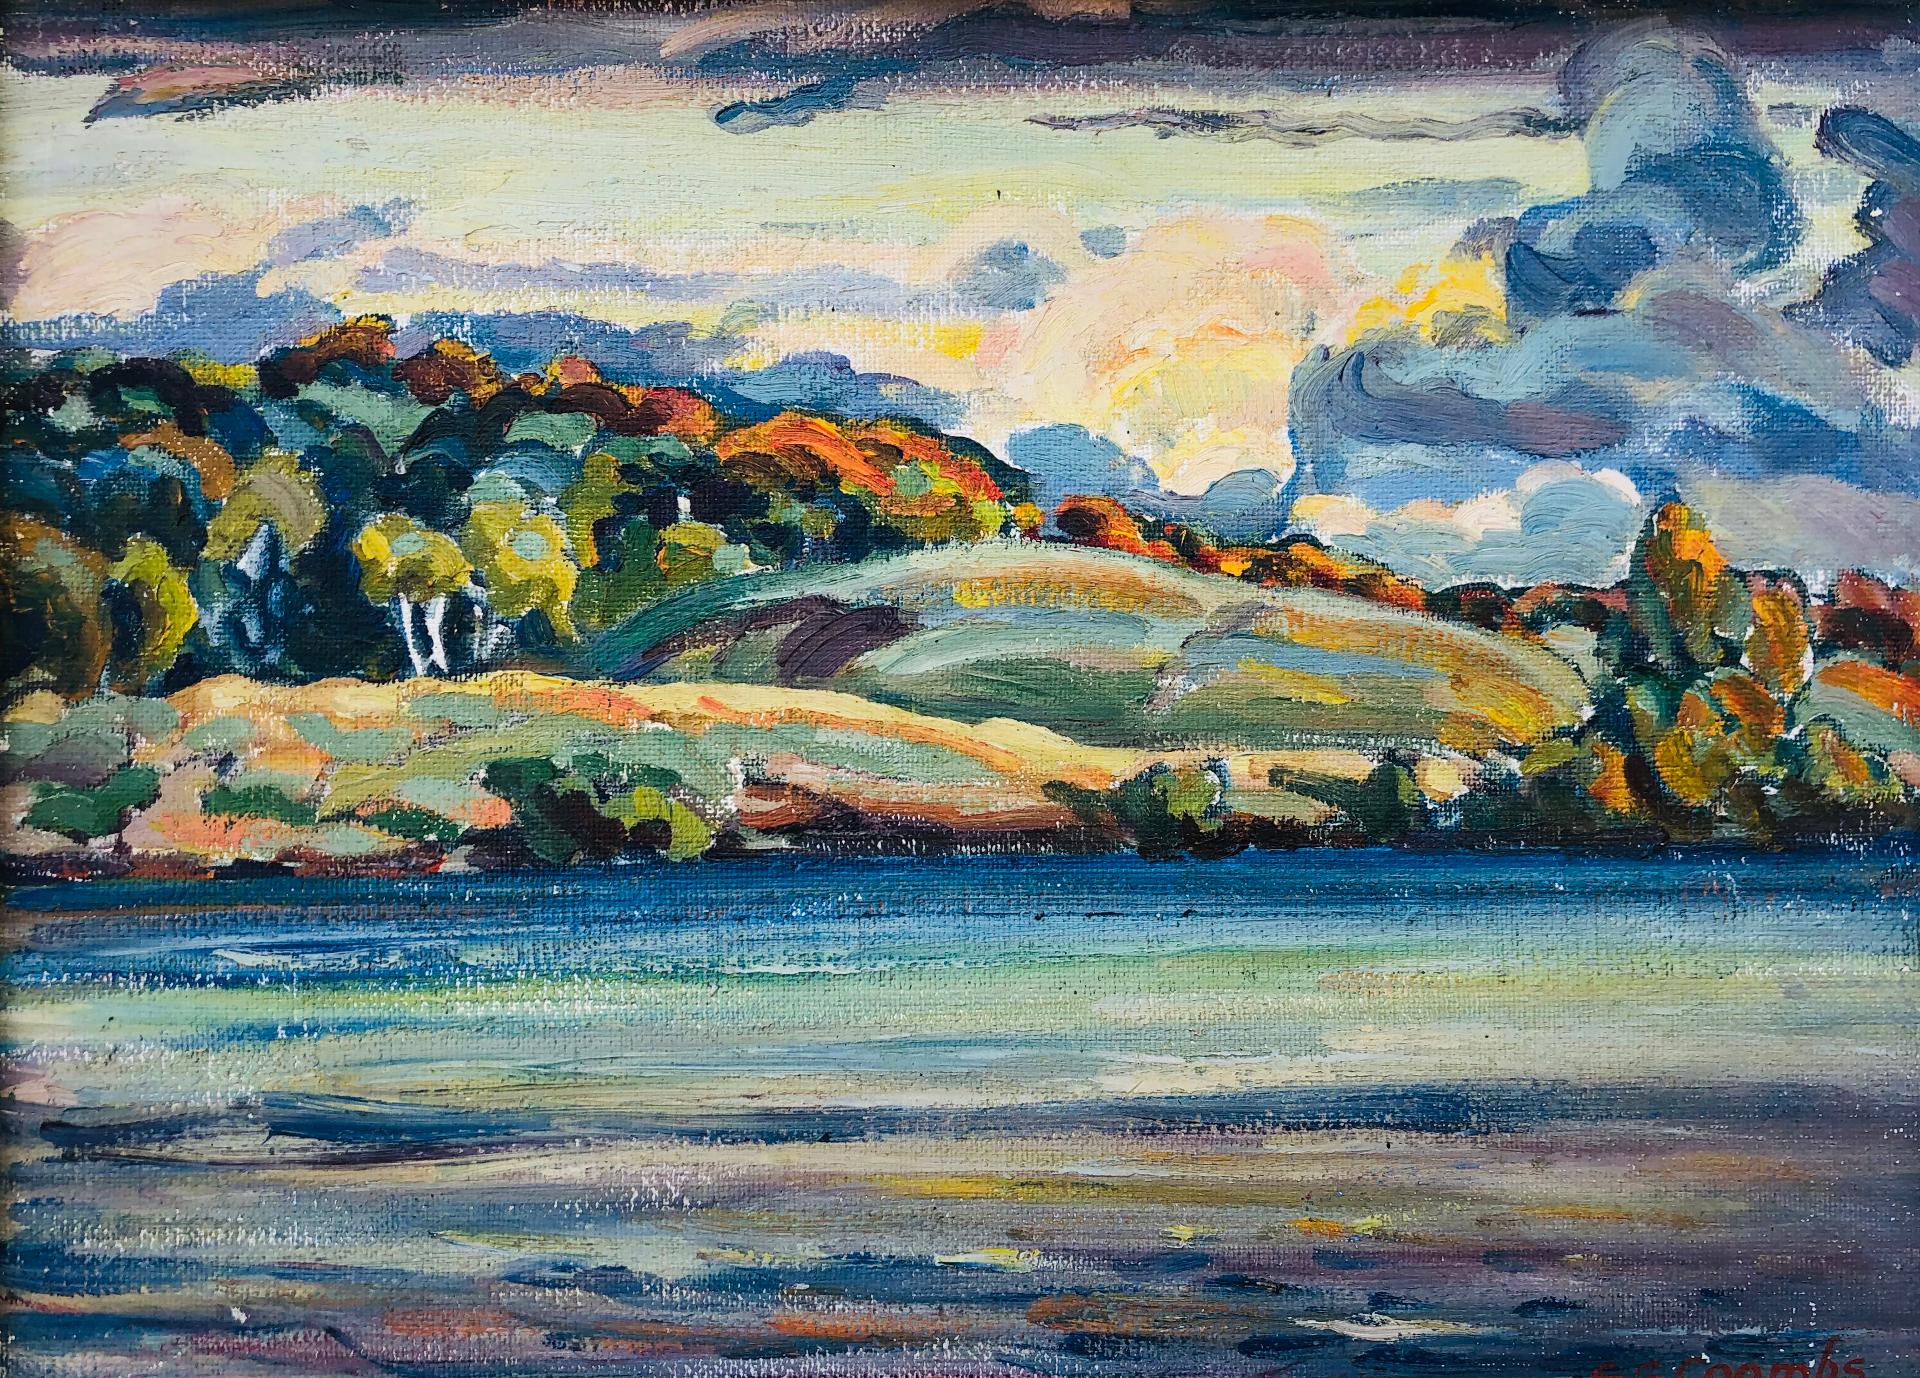 Edith Grace (Lawson) Coombs (1890-1986) - Sunset (Lyrical Autumn), Neighick Lake, 1941